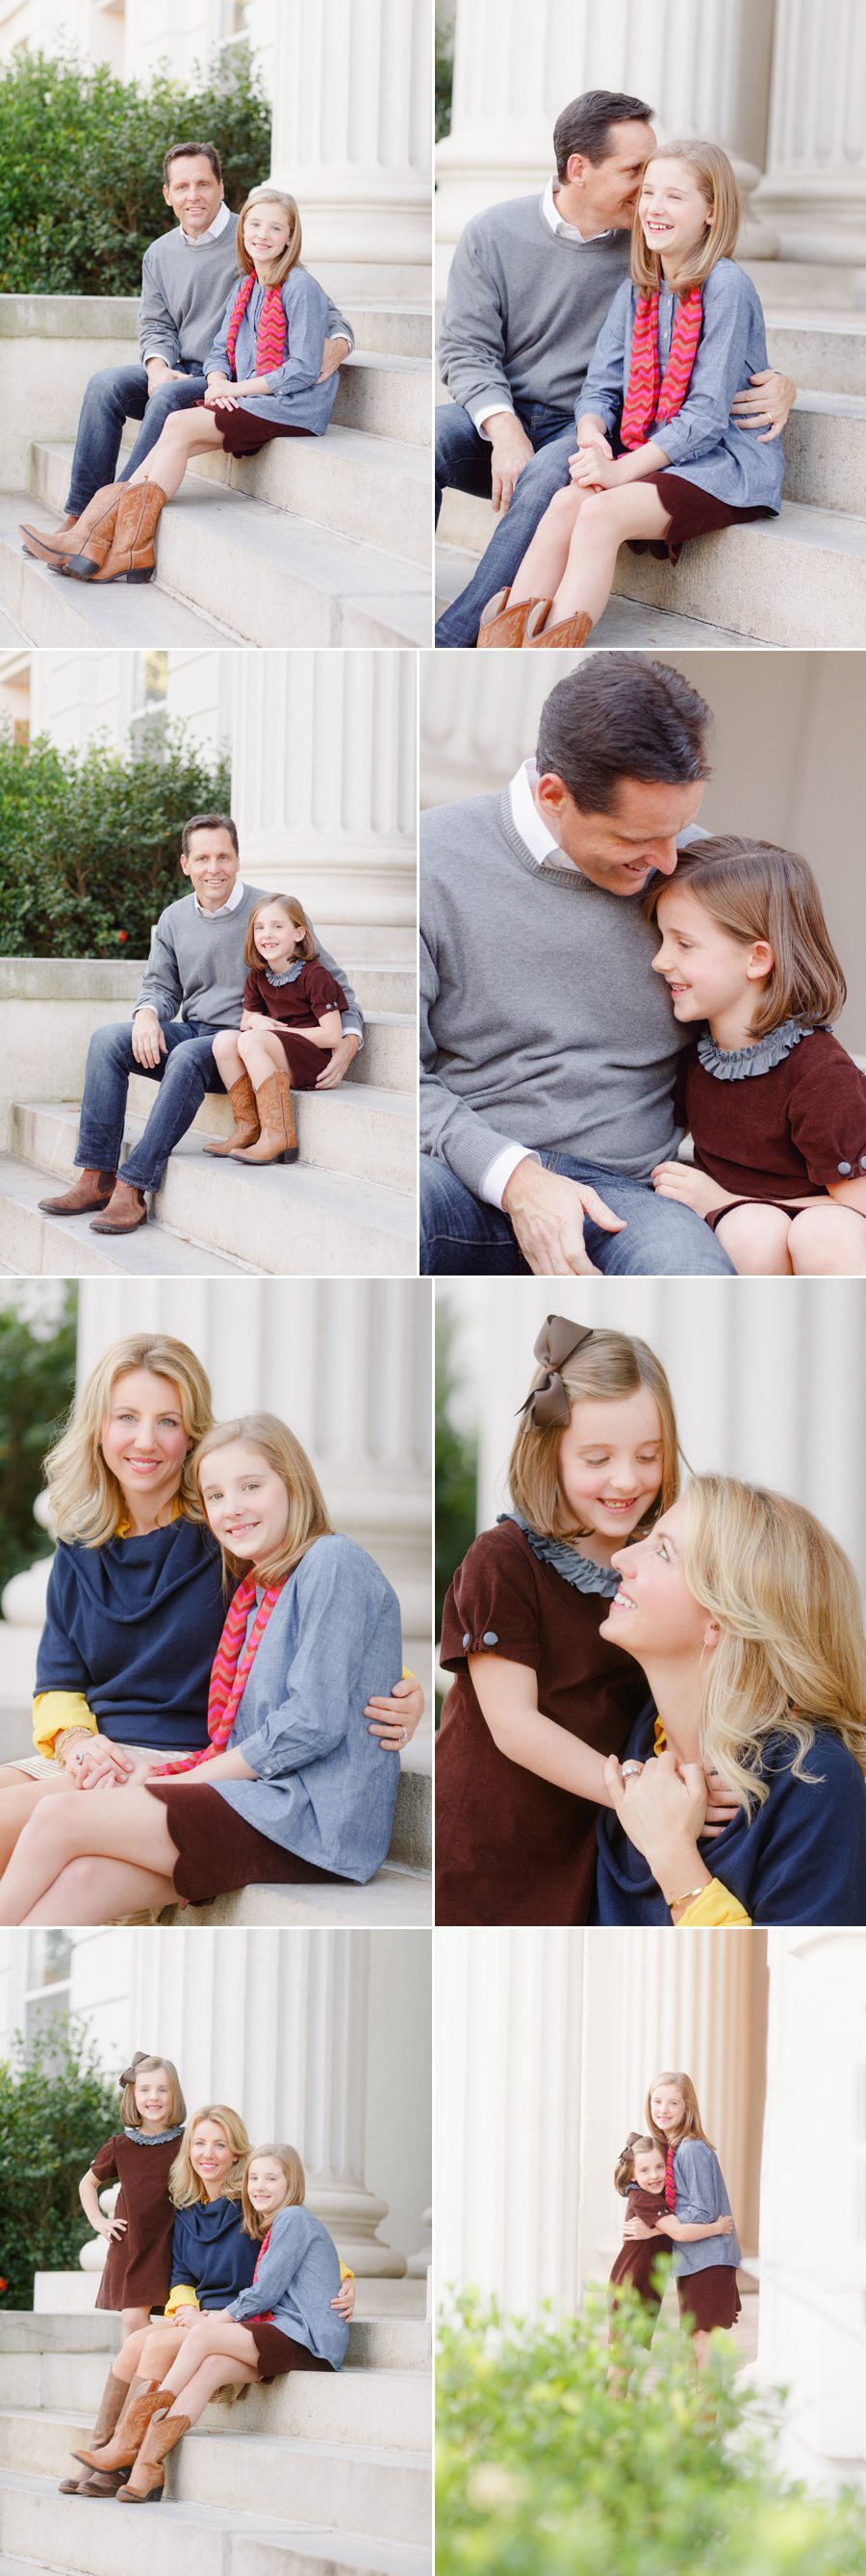 Family photography of parents with their children in Athens, GA.